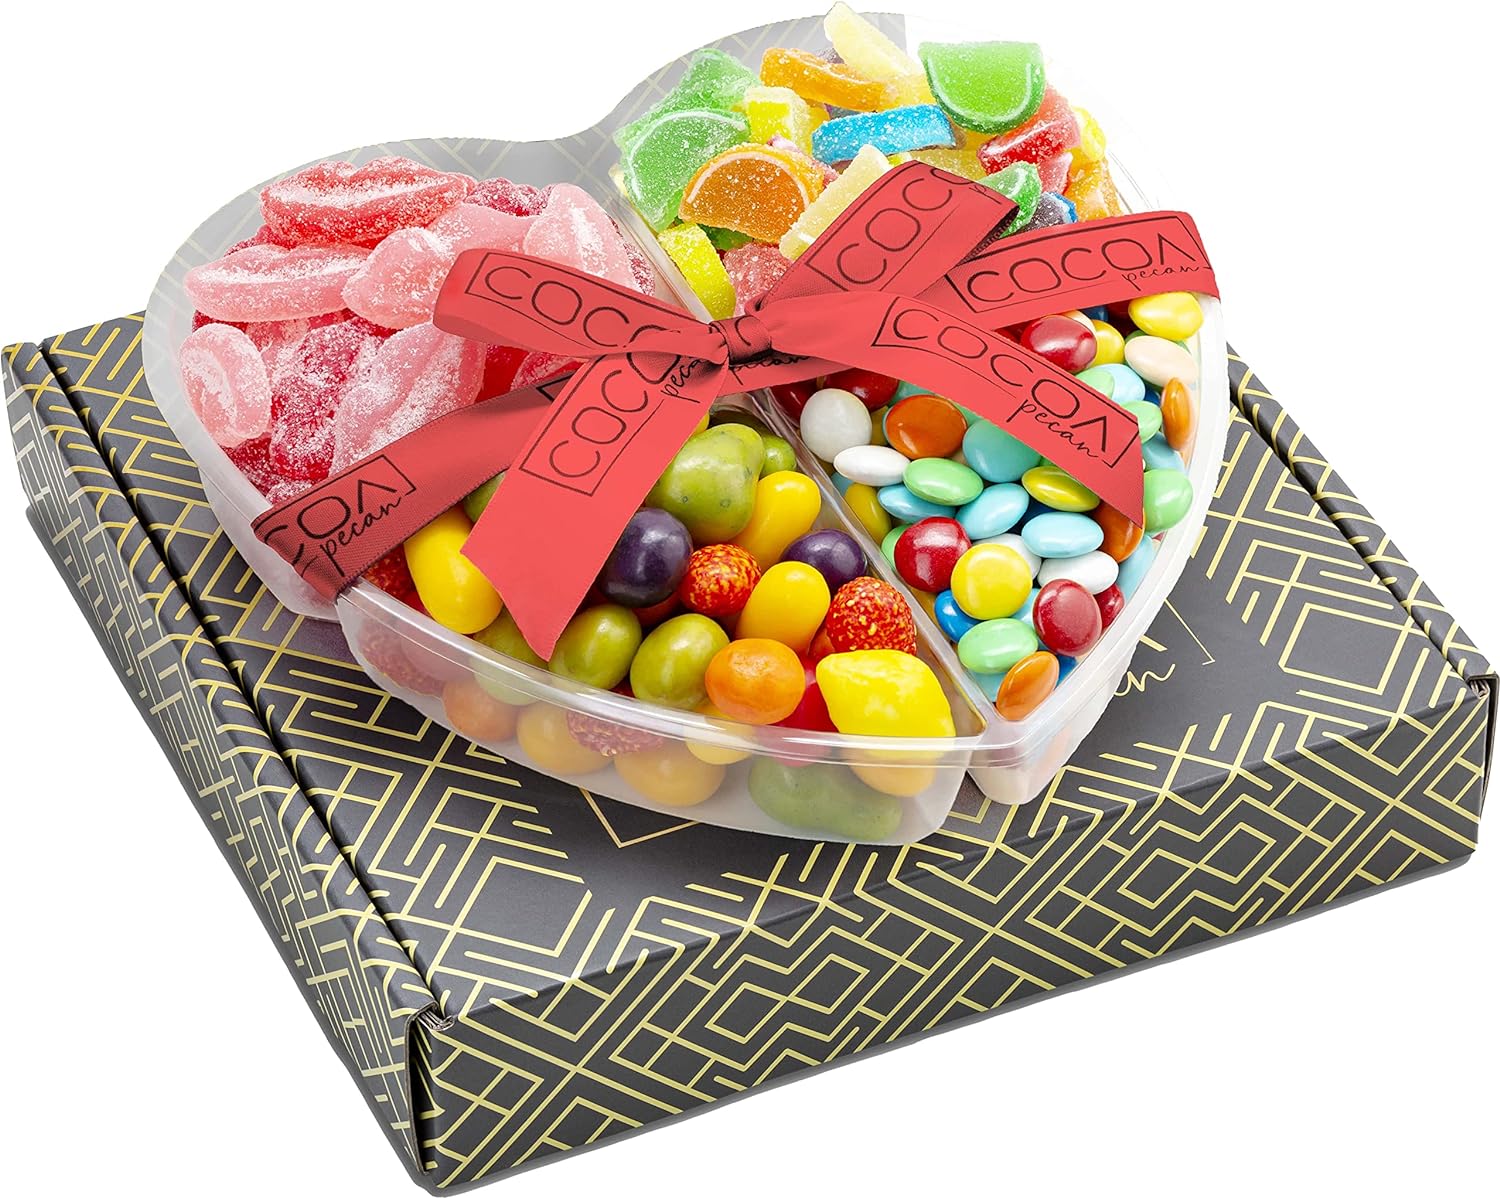 Sweet and Candy Gift Basket Platter Box - Gift, Anniversaries, and Romantic Occasions, Heart-Shaped